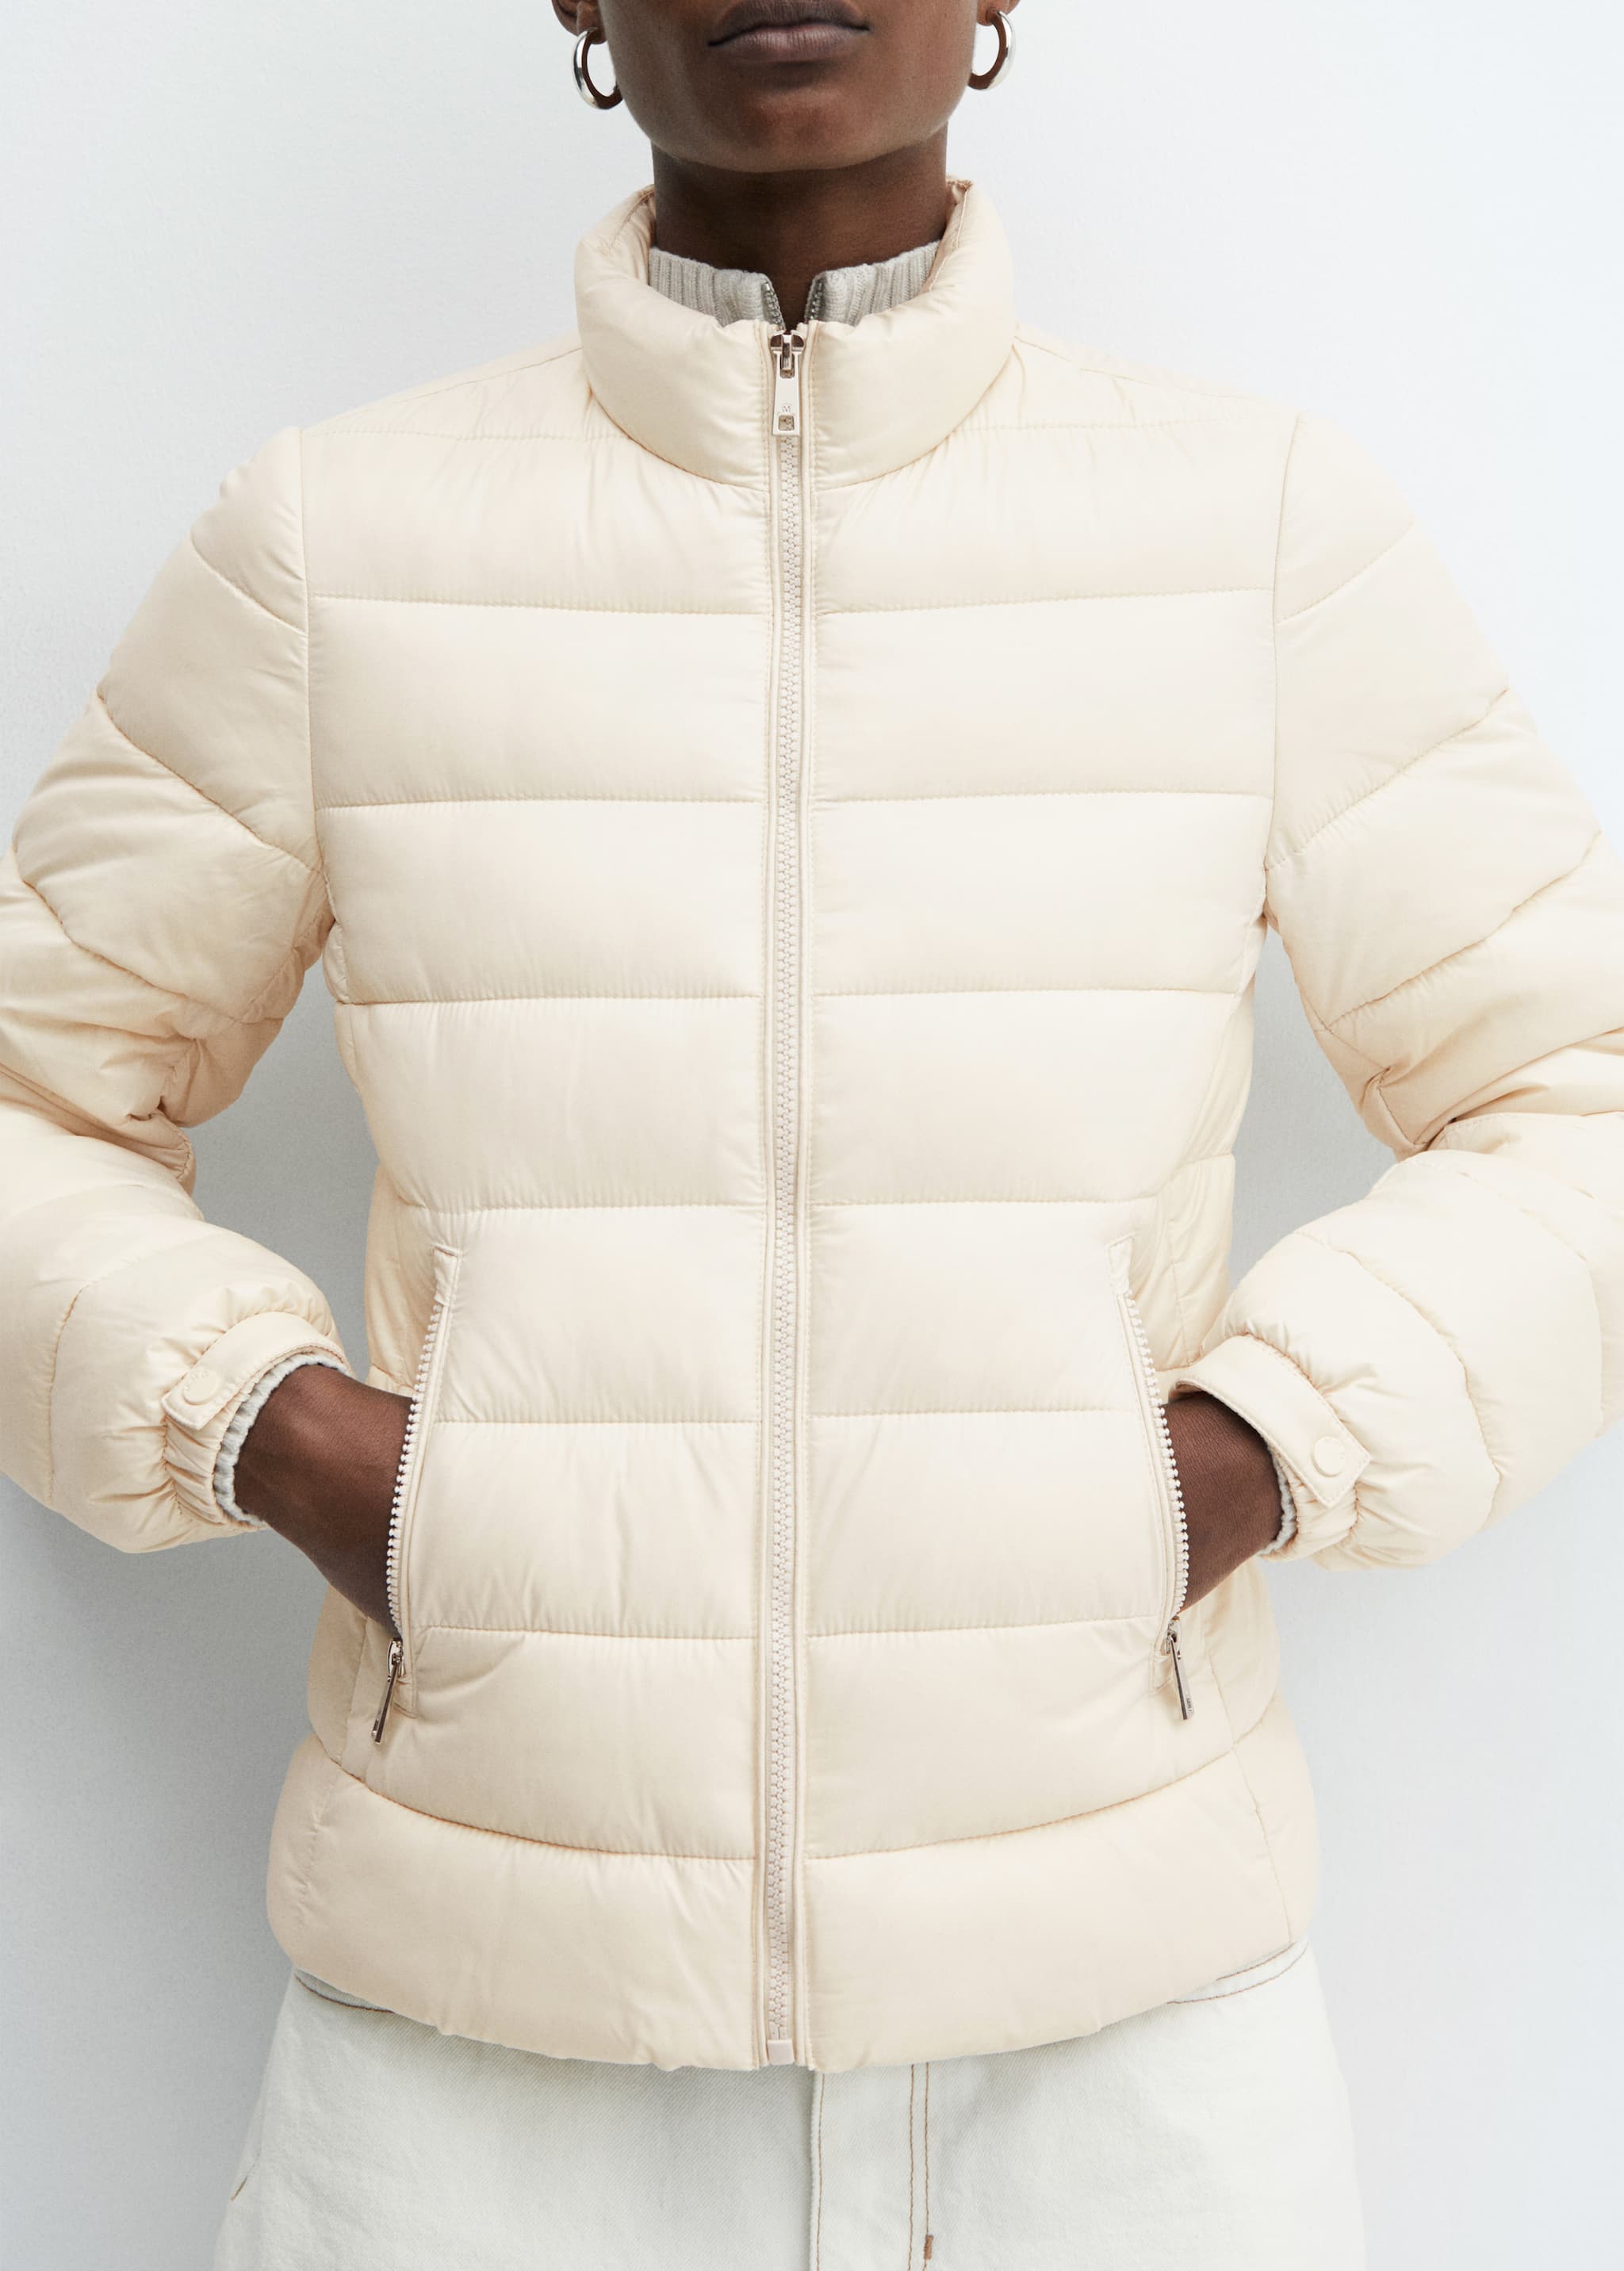 Pocket quilted jacket - Details of the article 6